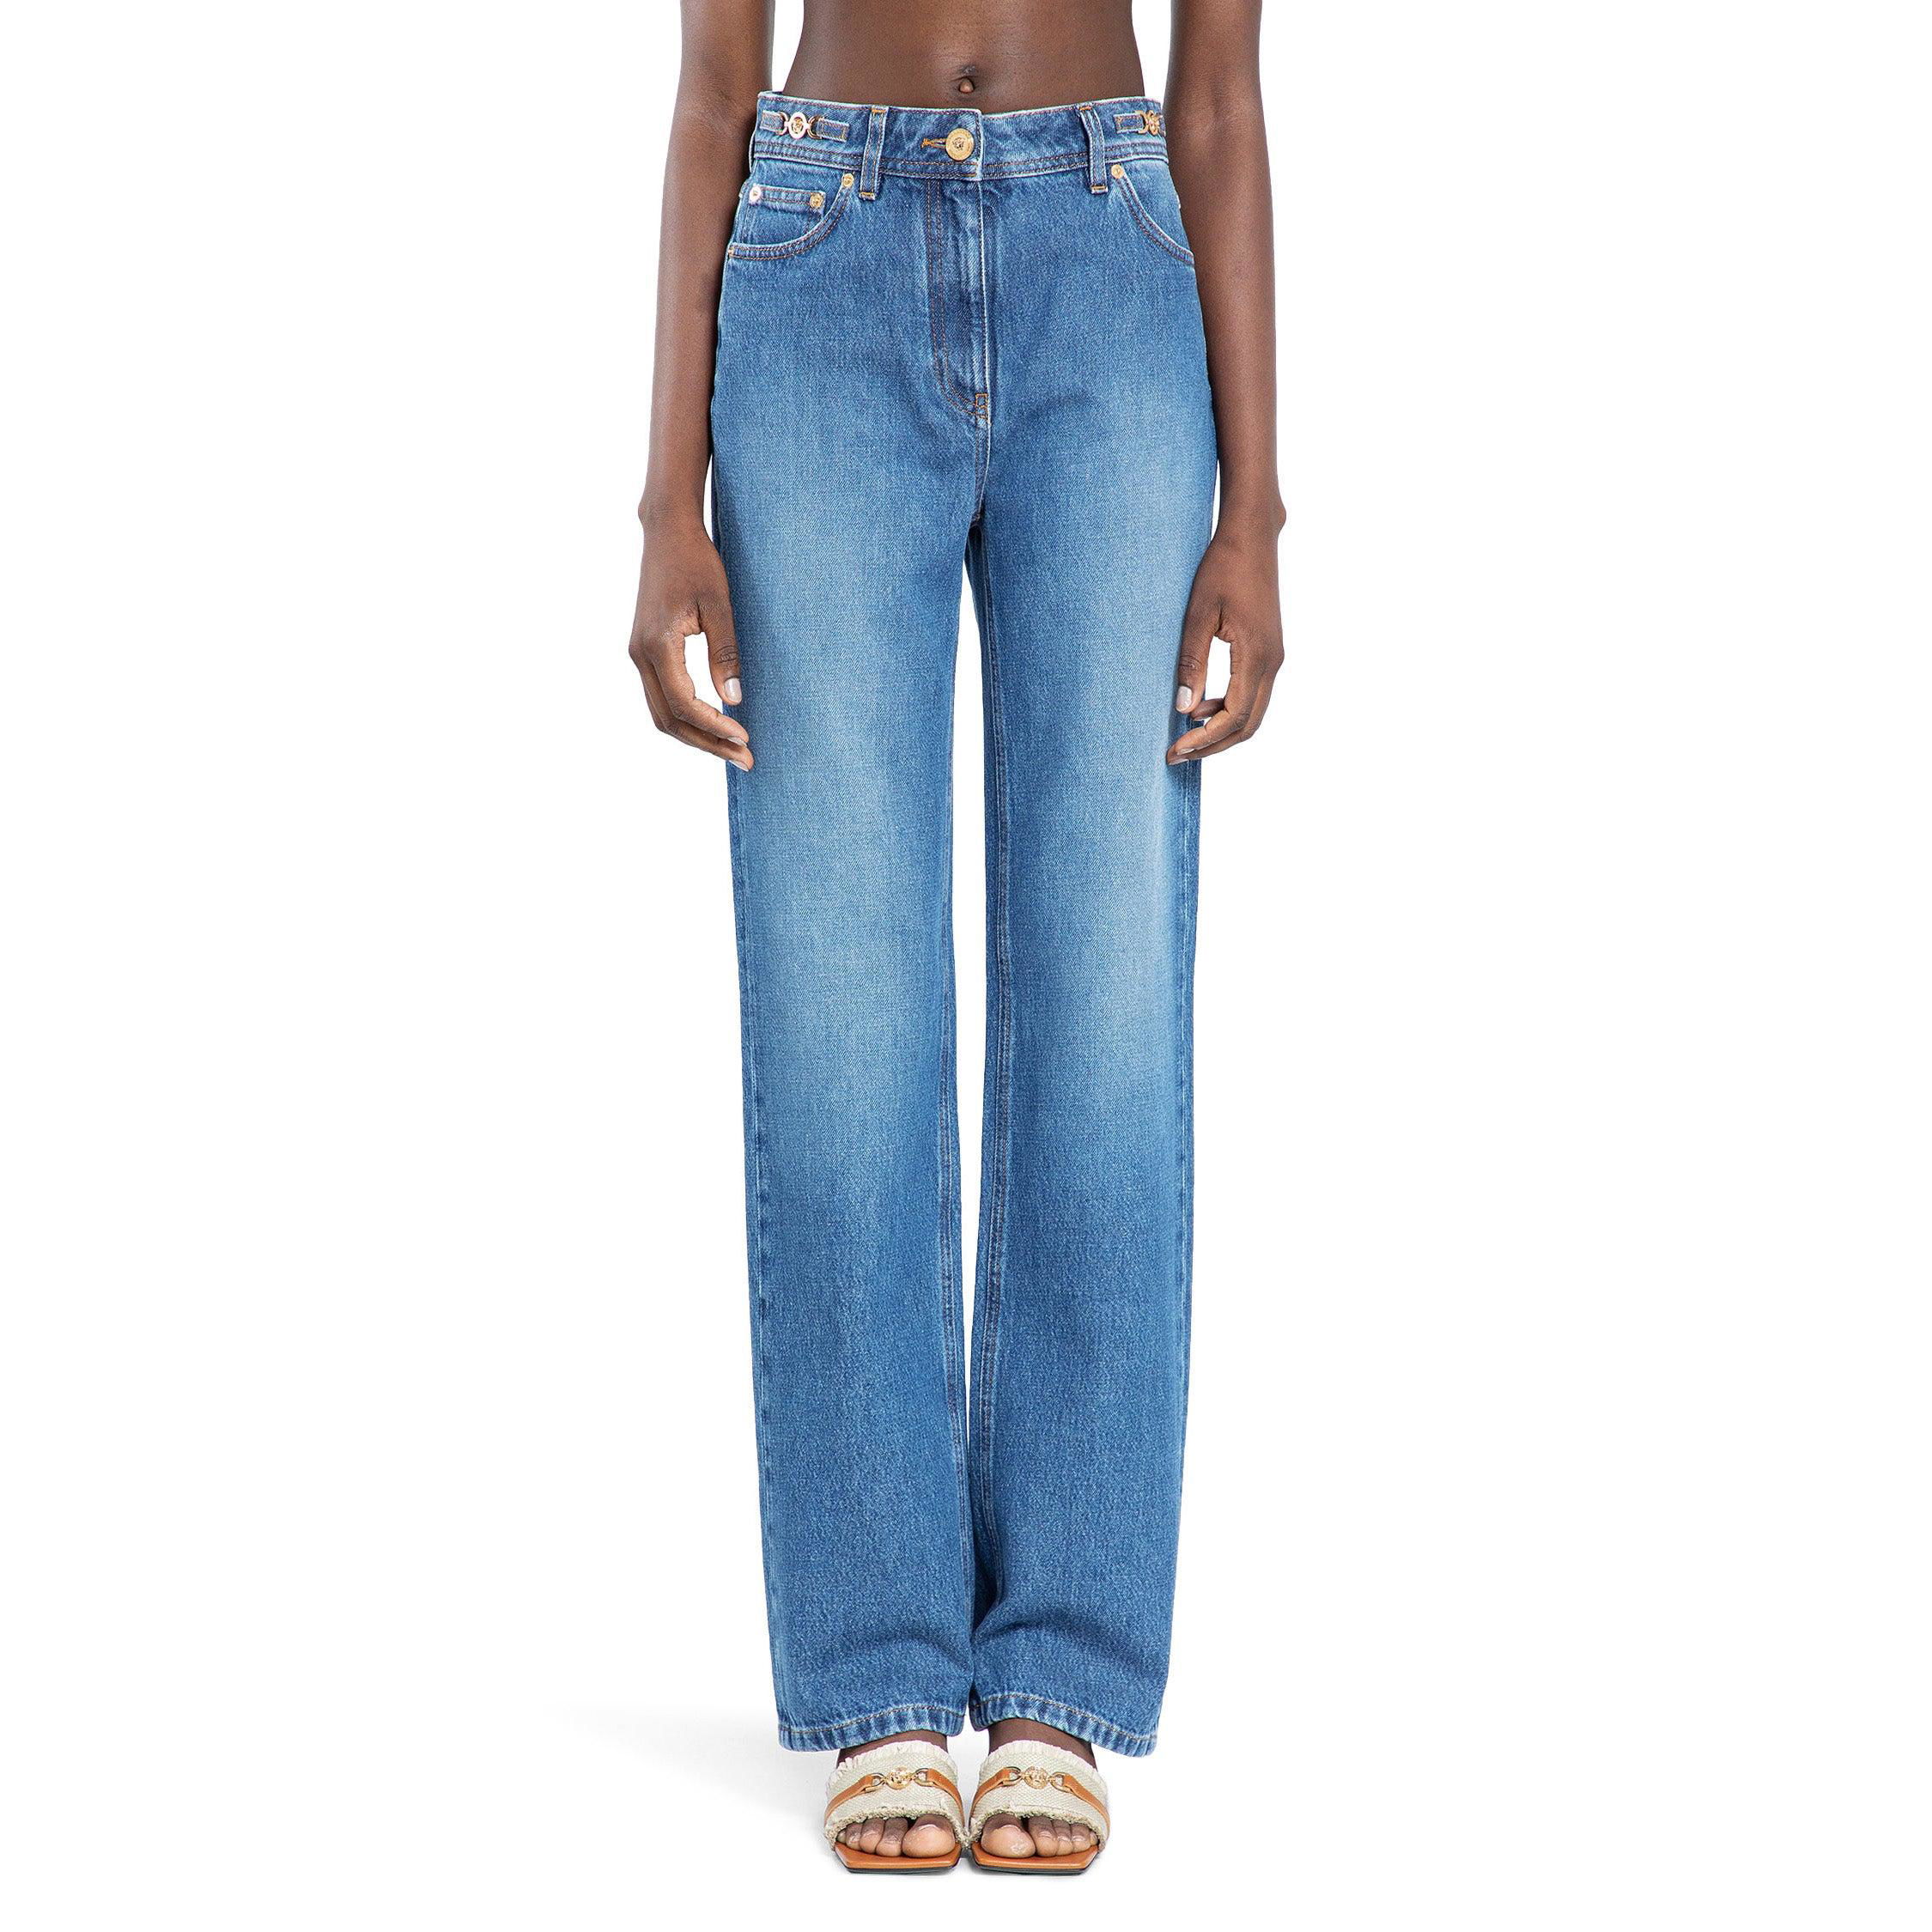 VERSACE WOMAN BLUE JEANS by VERSACE